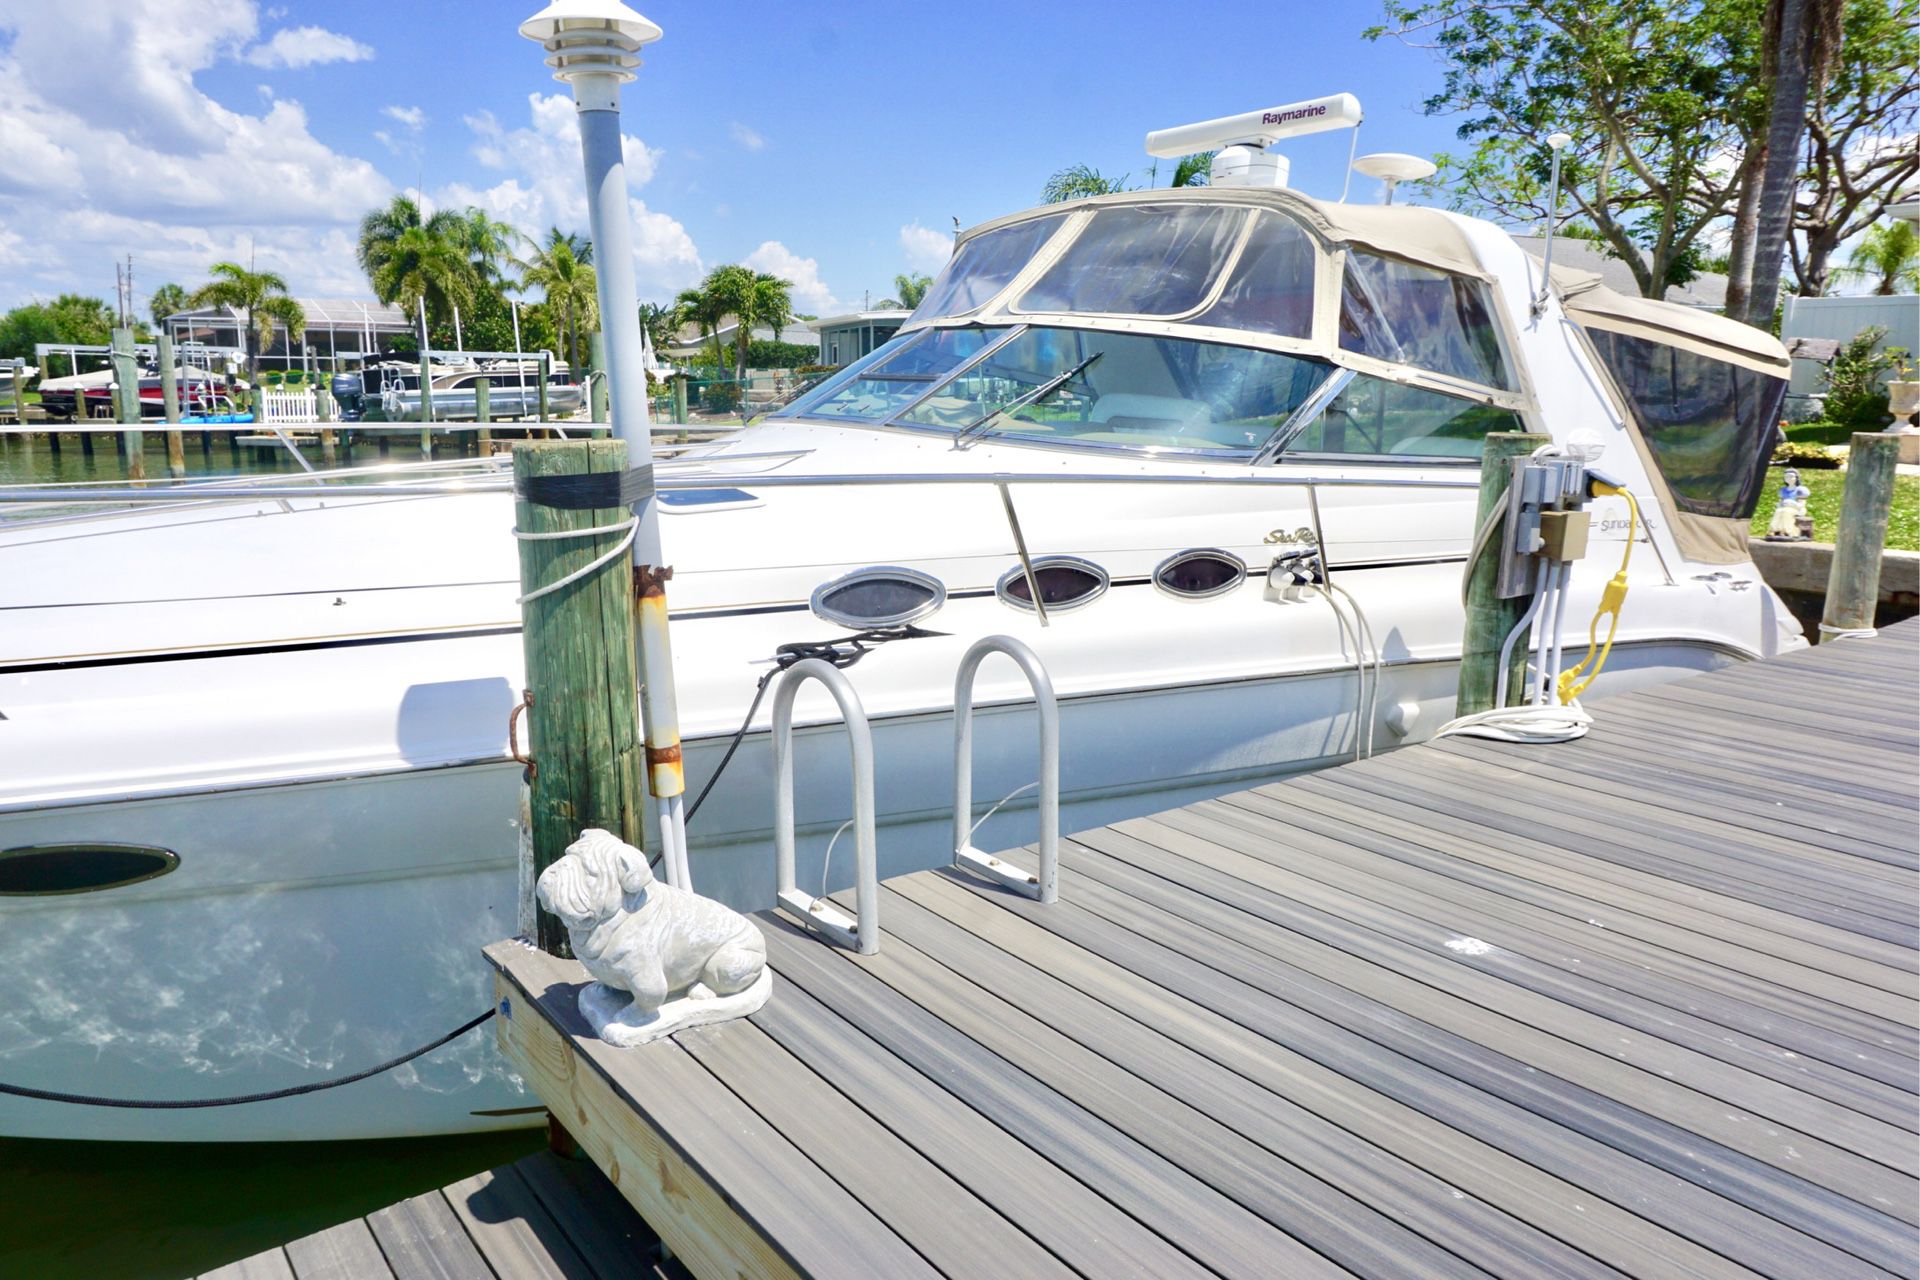 1999 Sea Ray 370 SUNDANCER Boat Well maintained with LOW HOURS! ONLY 300 on each engine!! Own this Beautiful Boat in pristine condition for a fractio